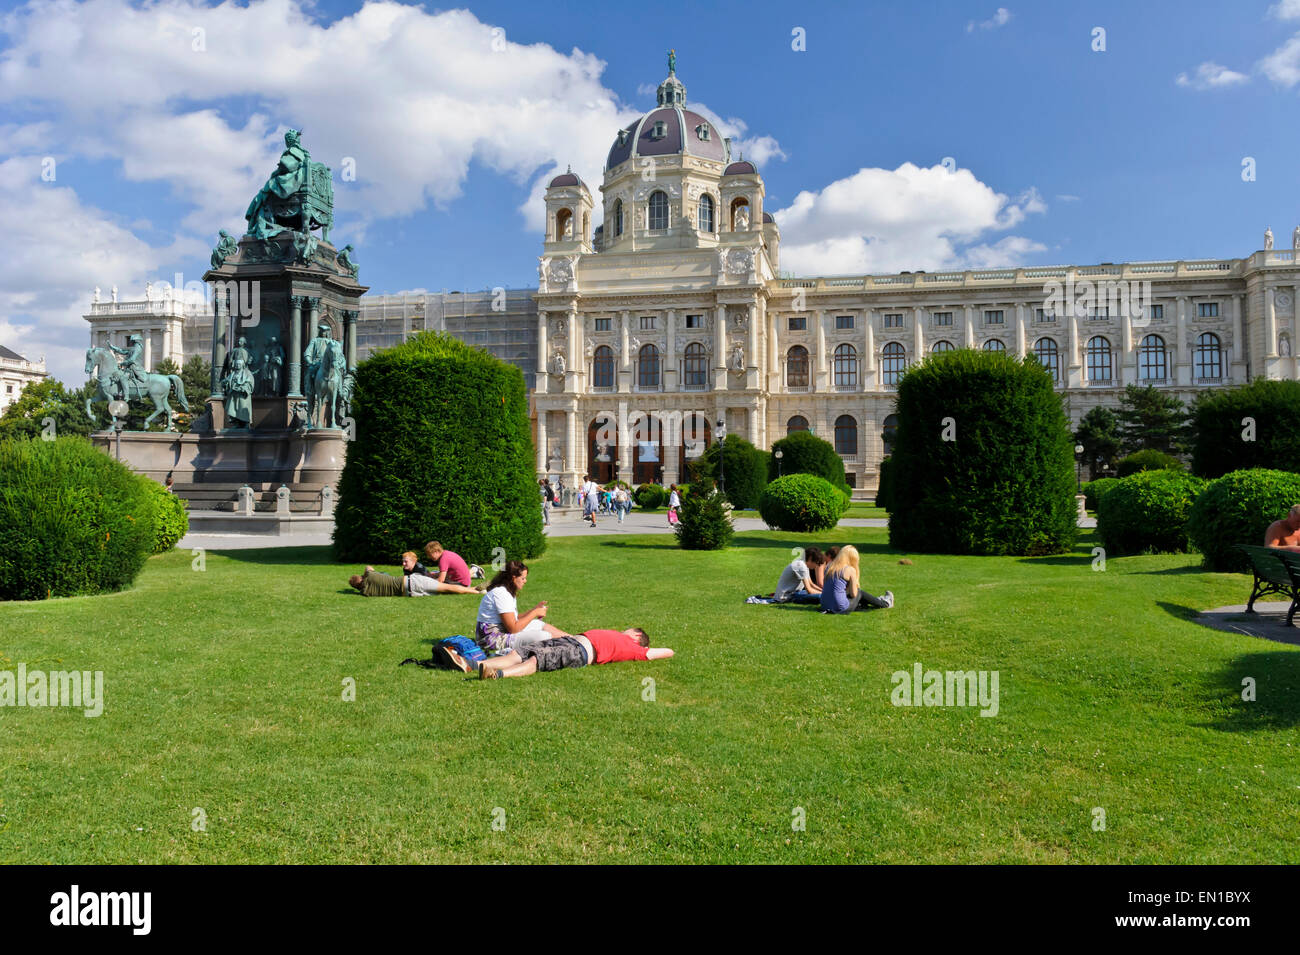 The Maria Theresa Monument in front of the  Kunsthistorisches museum, Vienna, Austria. Stock Photo